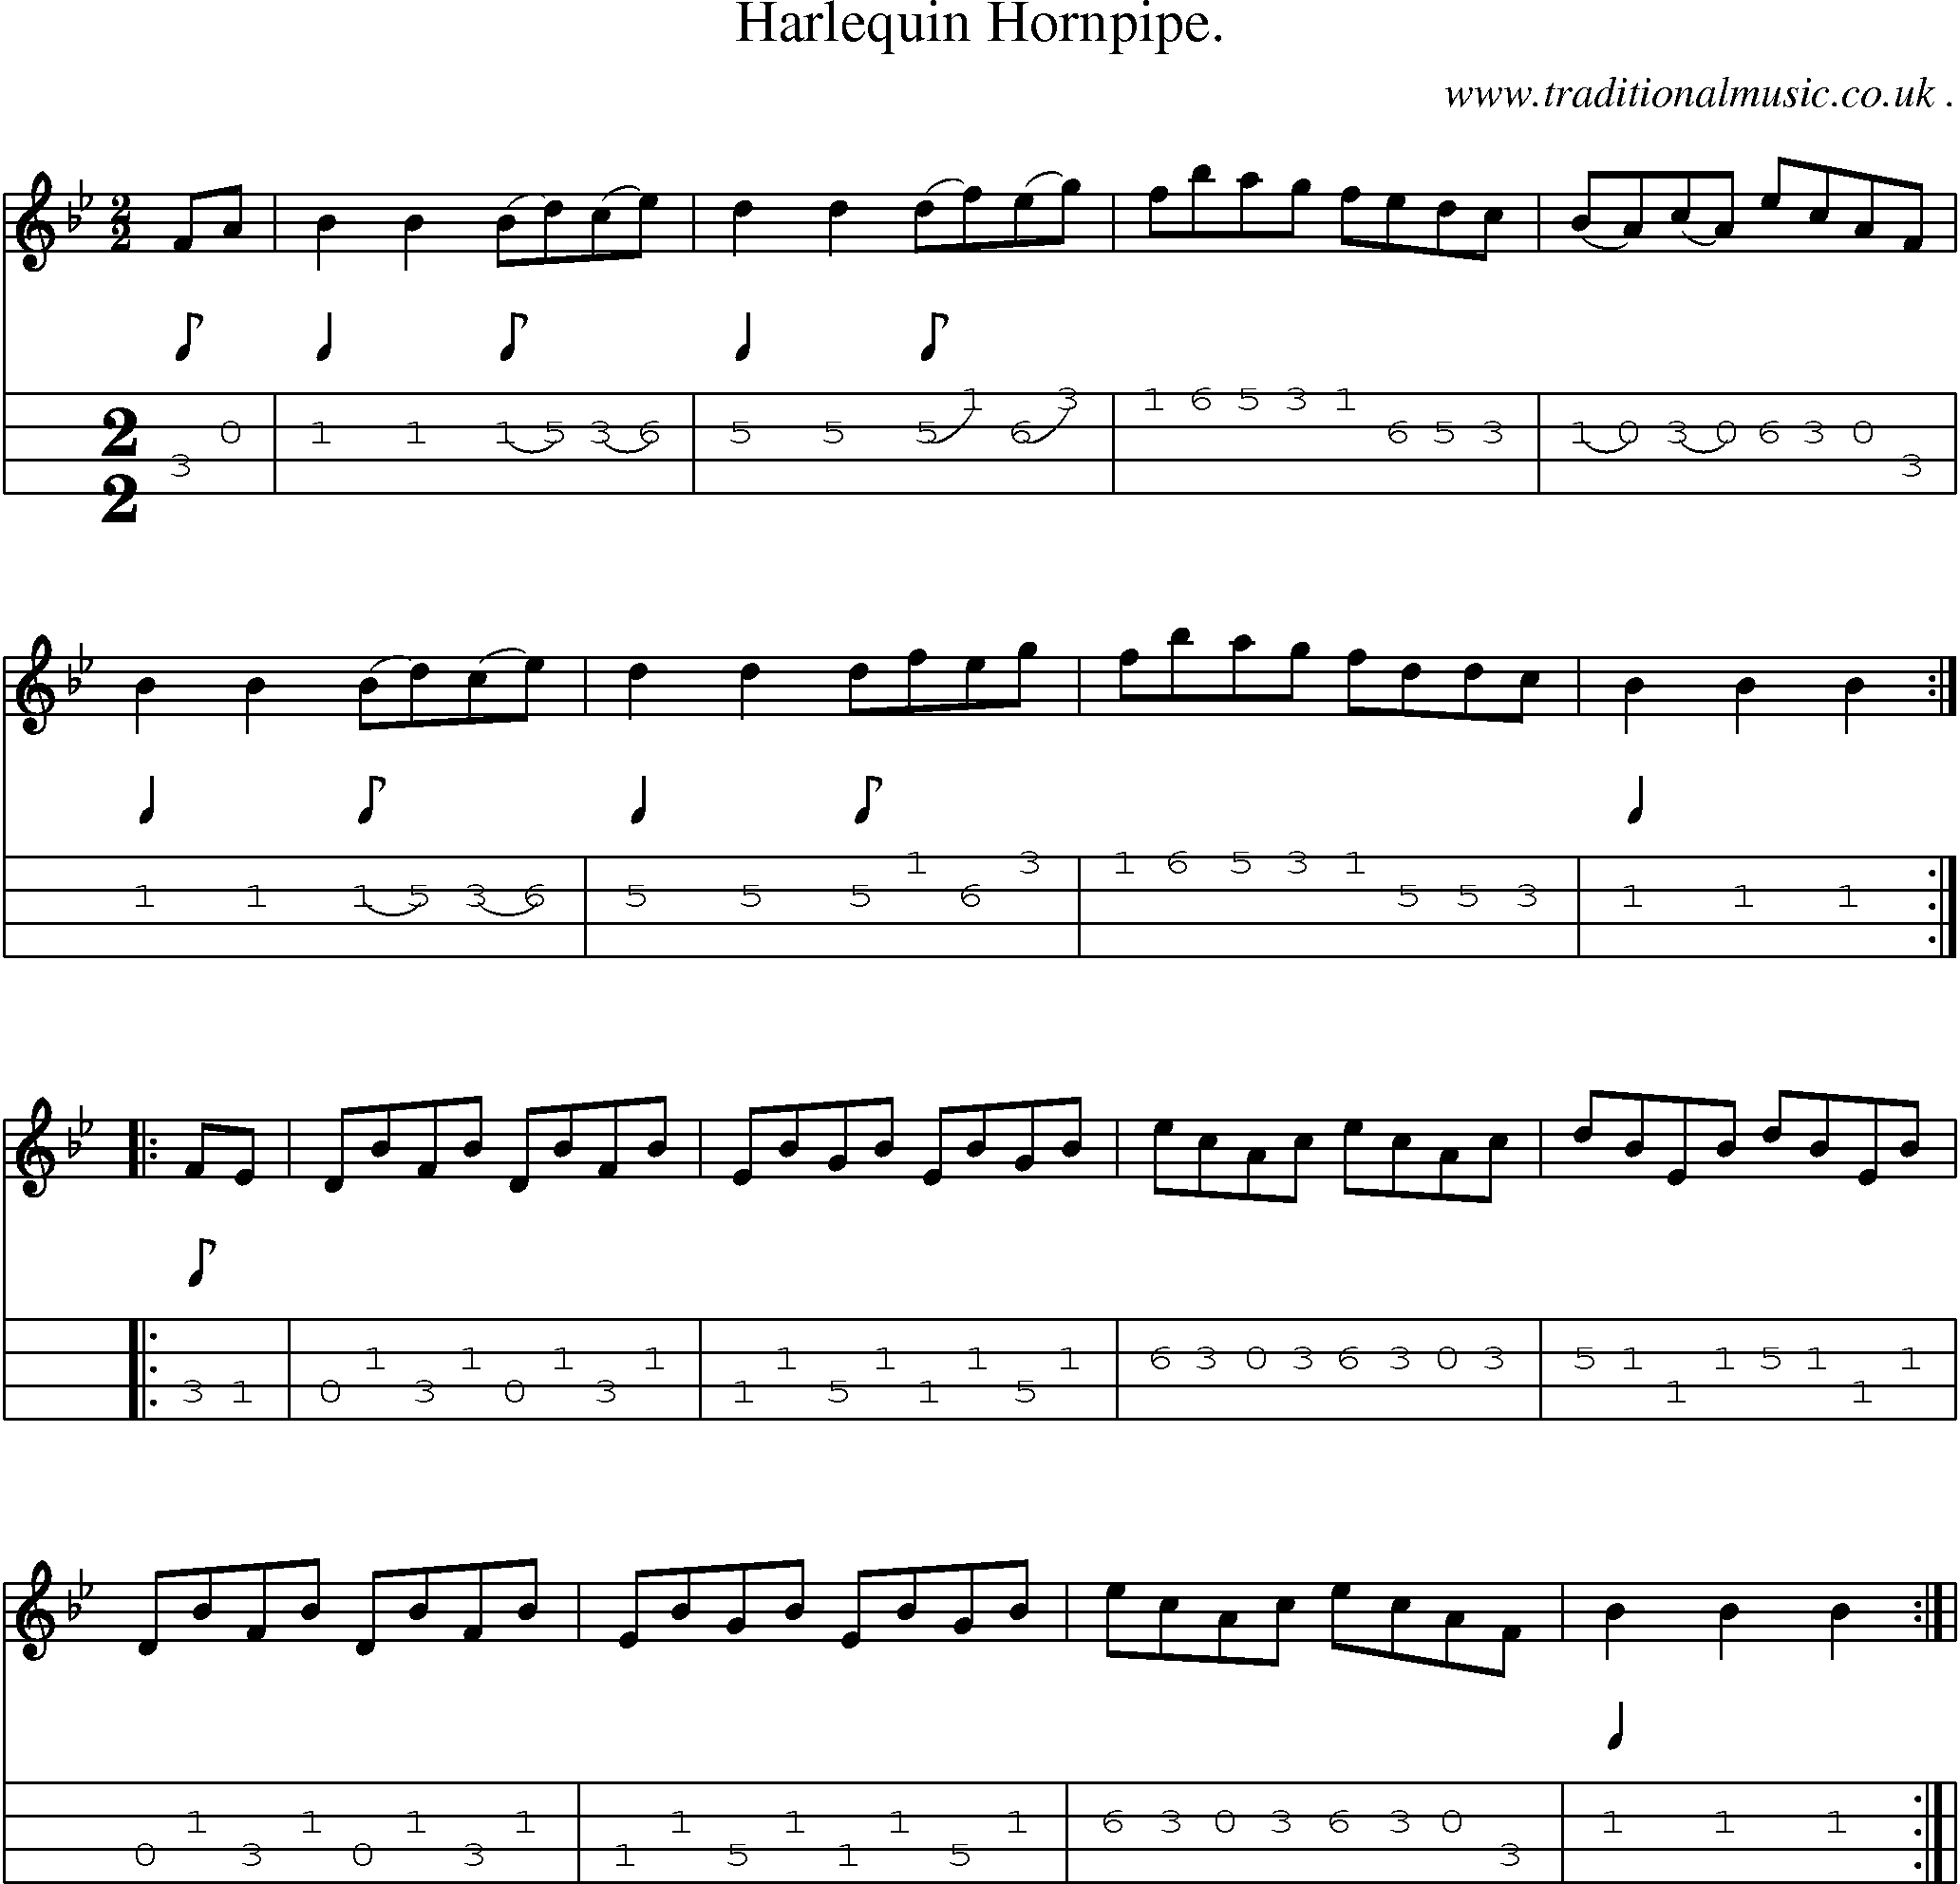 Sheet-Music and Mandolin Tabs for Harlequin Hornpipe